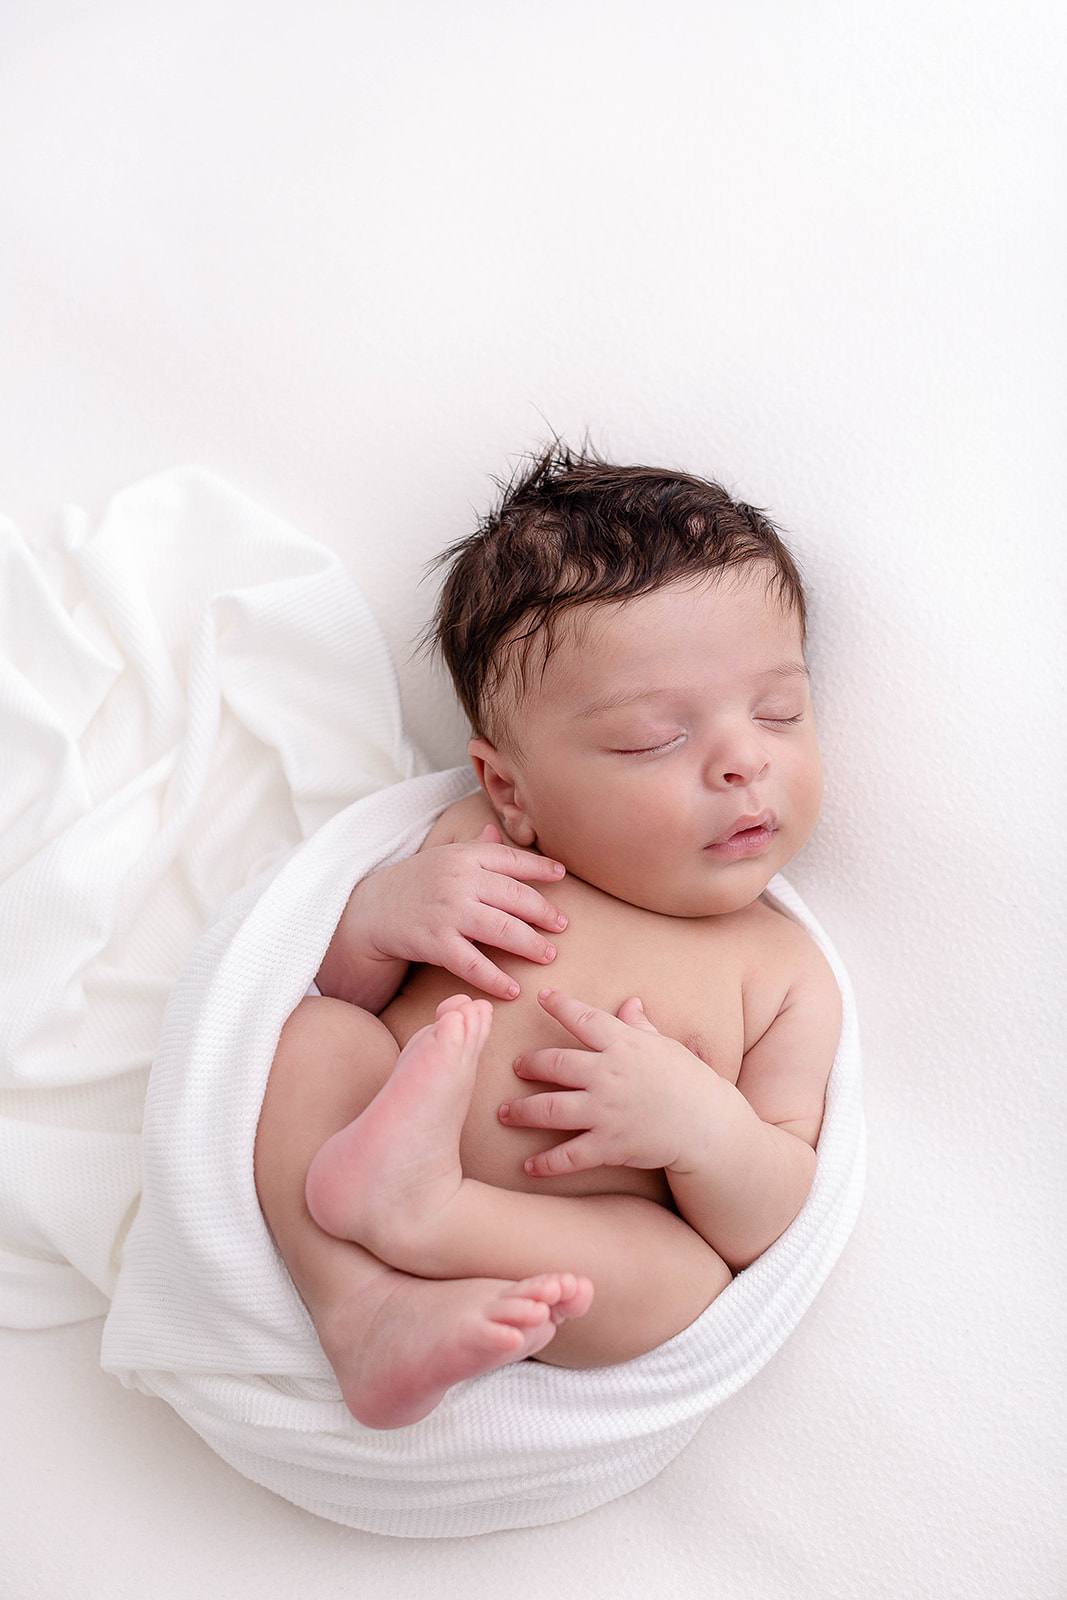 A newborn baby sleeps in a white swaddle